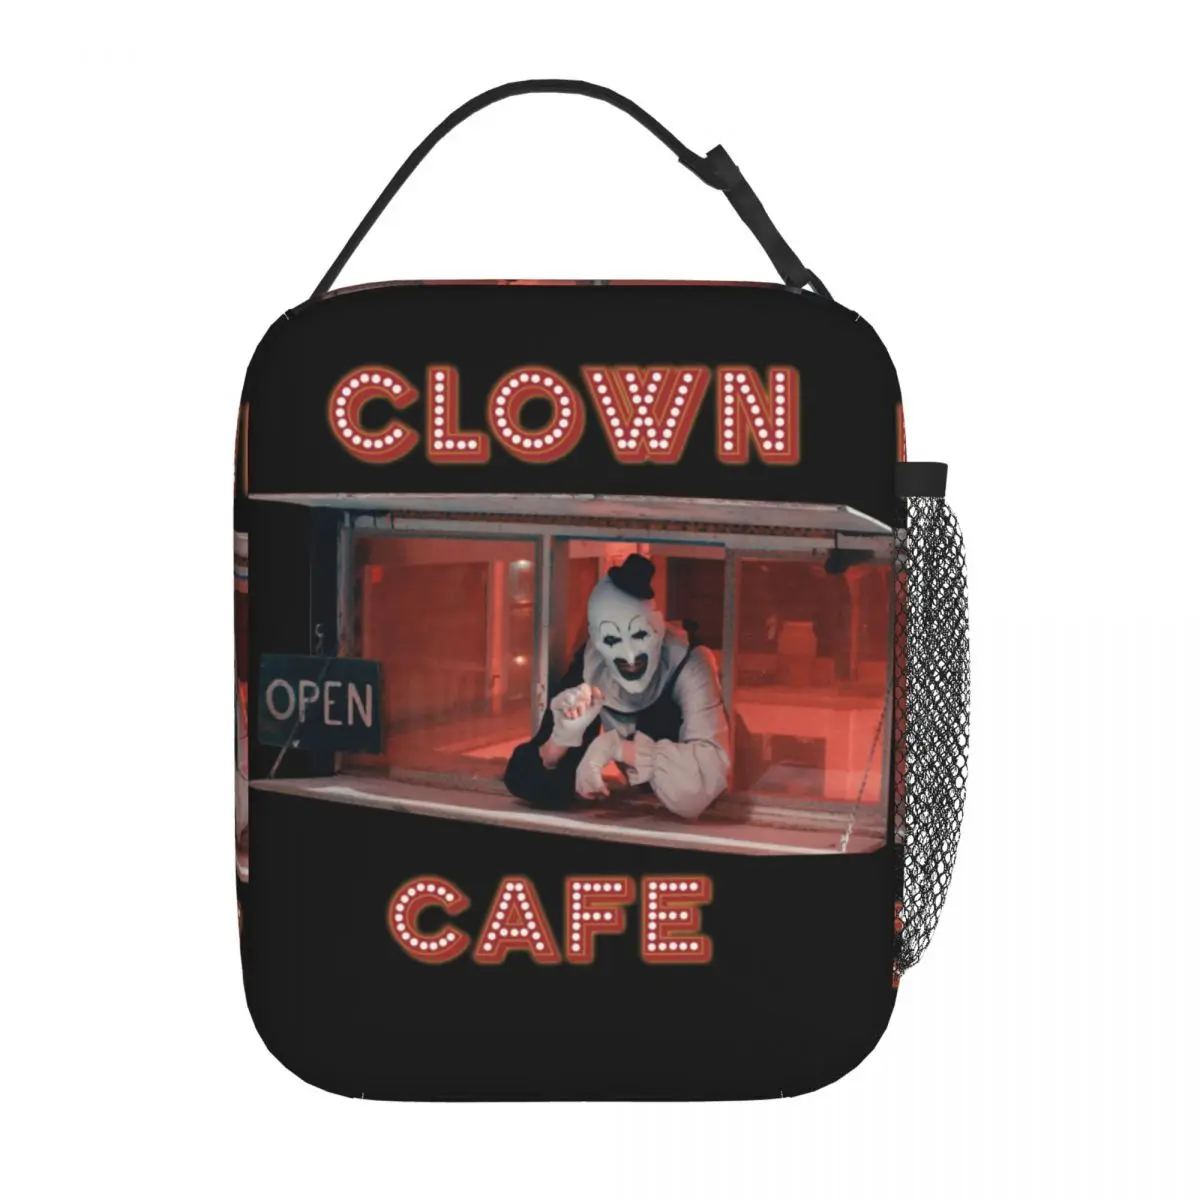 

Terrifier 2 Art The Clown Cafe Accessories Insulated Lunch Bag School Lunch Container New Arrival Cooler Thermal Bento Box